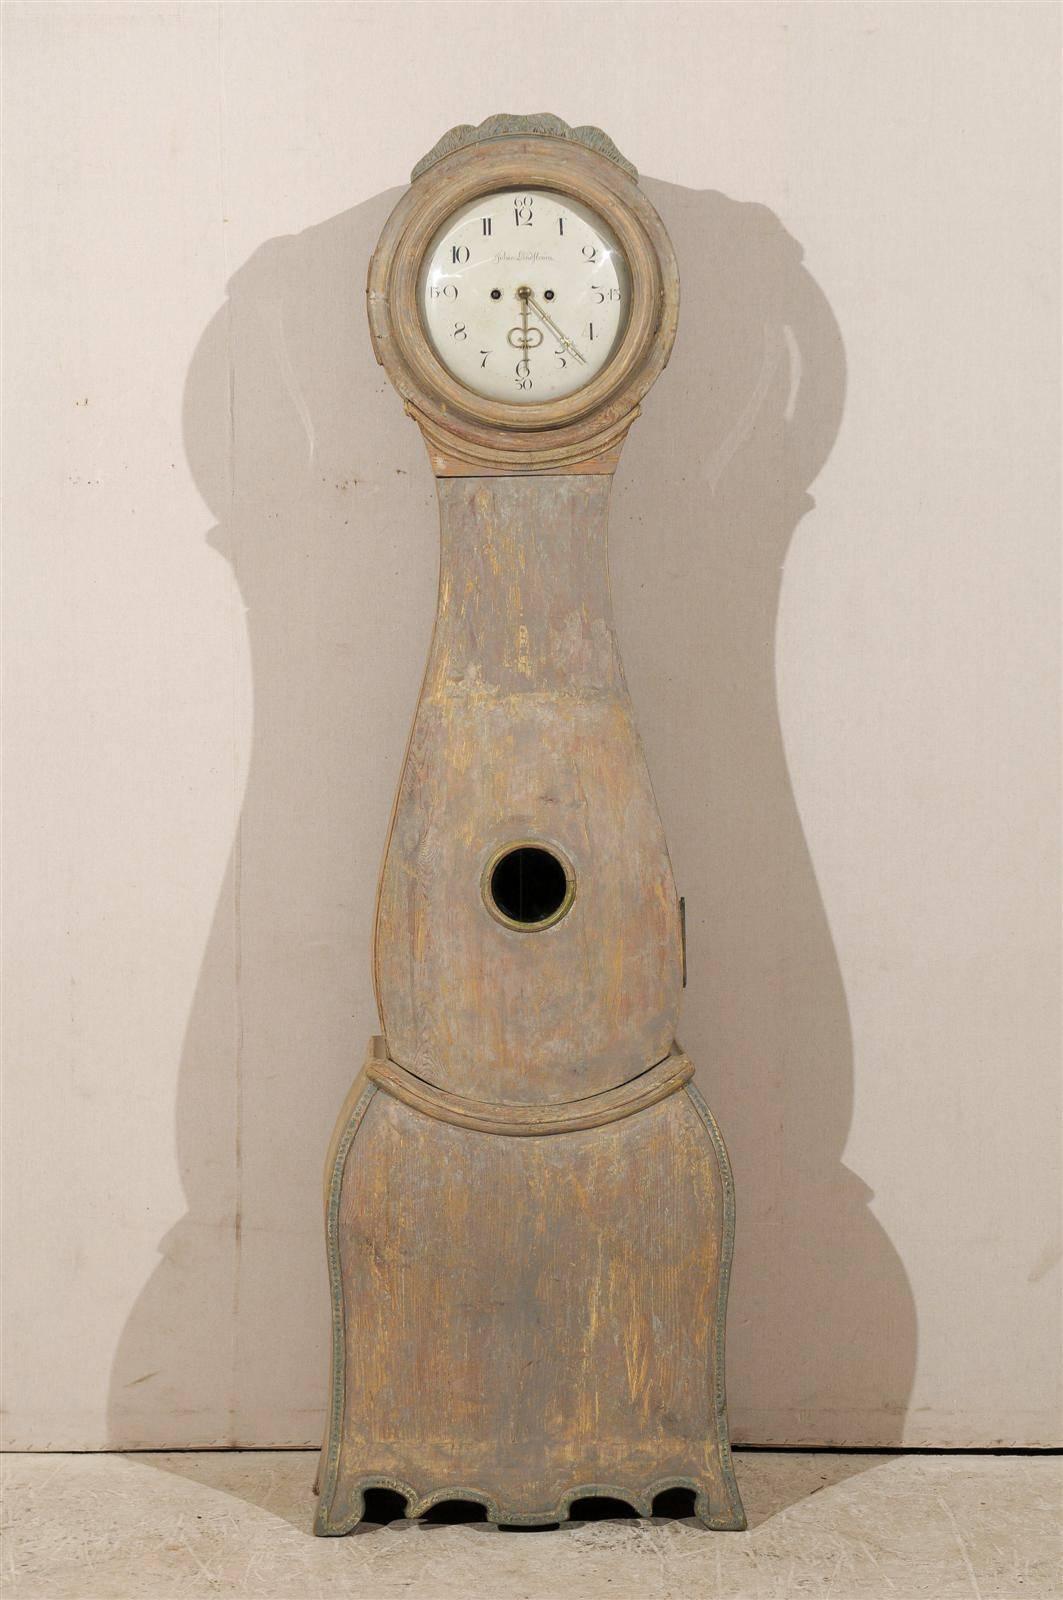 A Swedish 18th century clock with original paint and delicately carved crest. This clock retains it's original metal face, hands and movement.  The face on this Swedish clock is signed Johan Lindstrom and the clock features a large one-hinged door